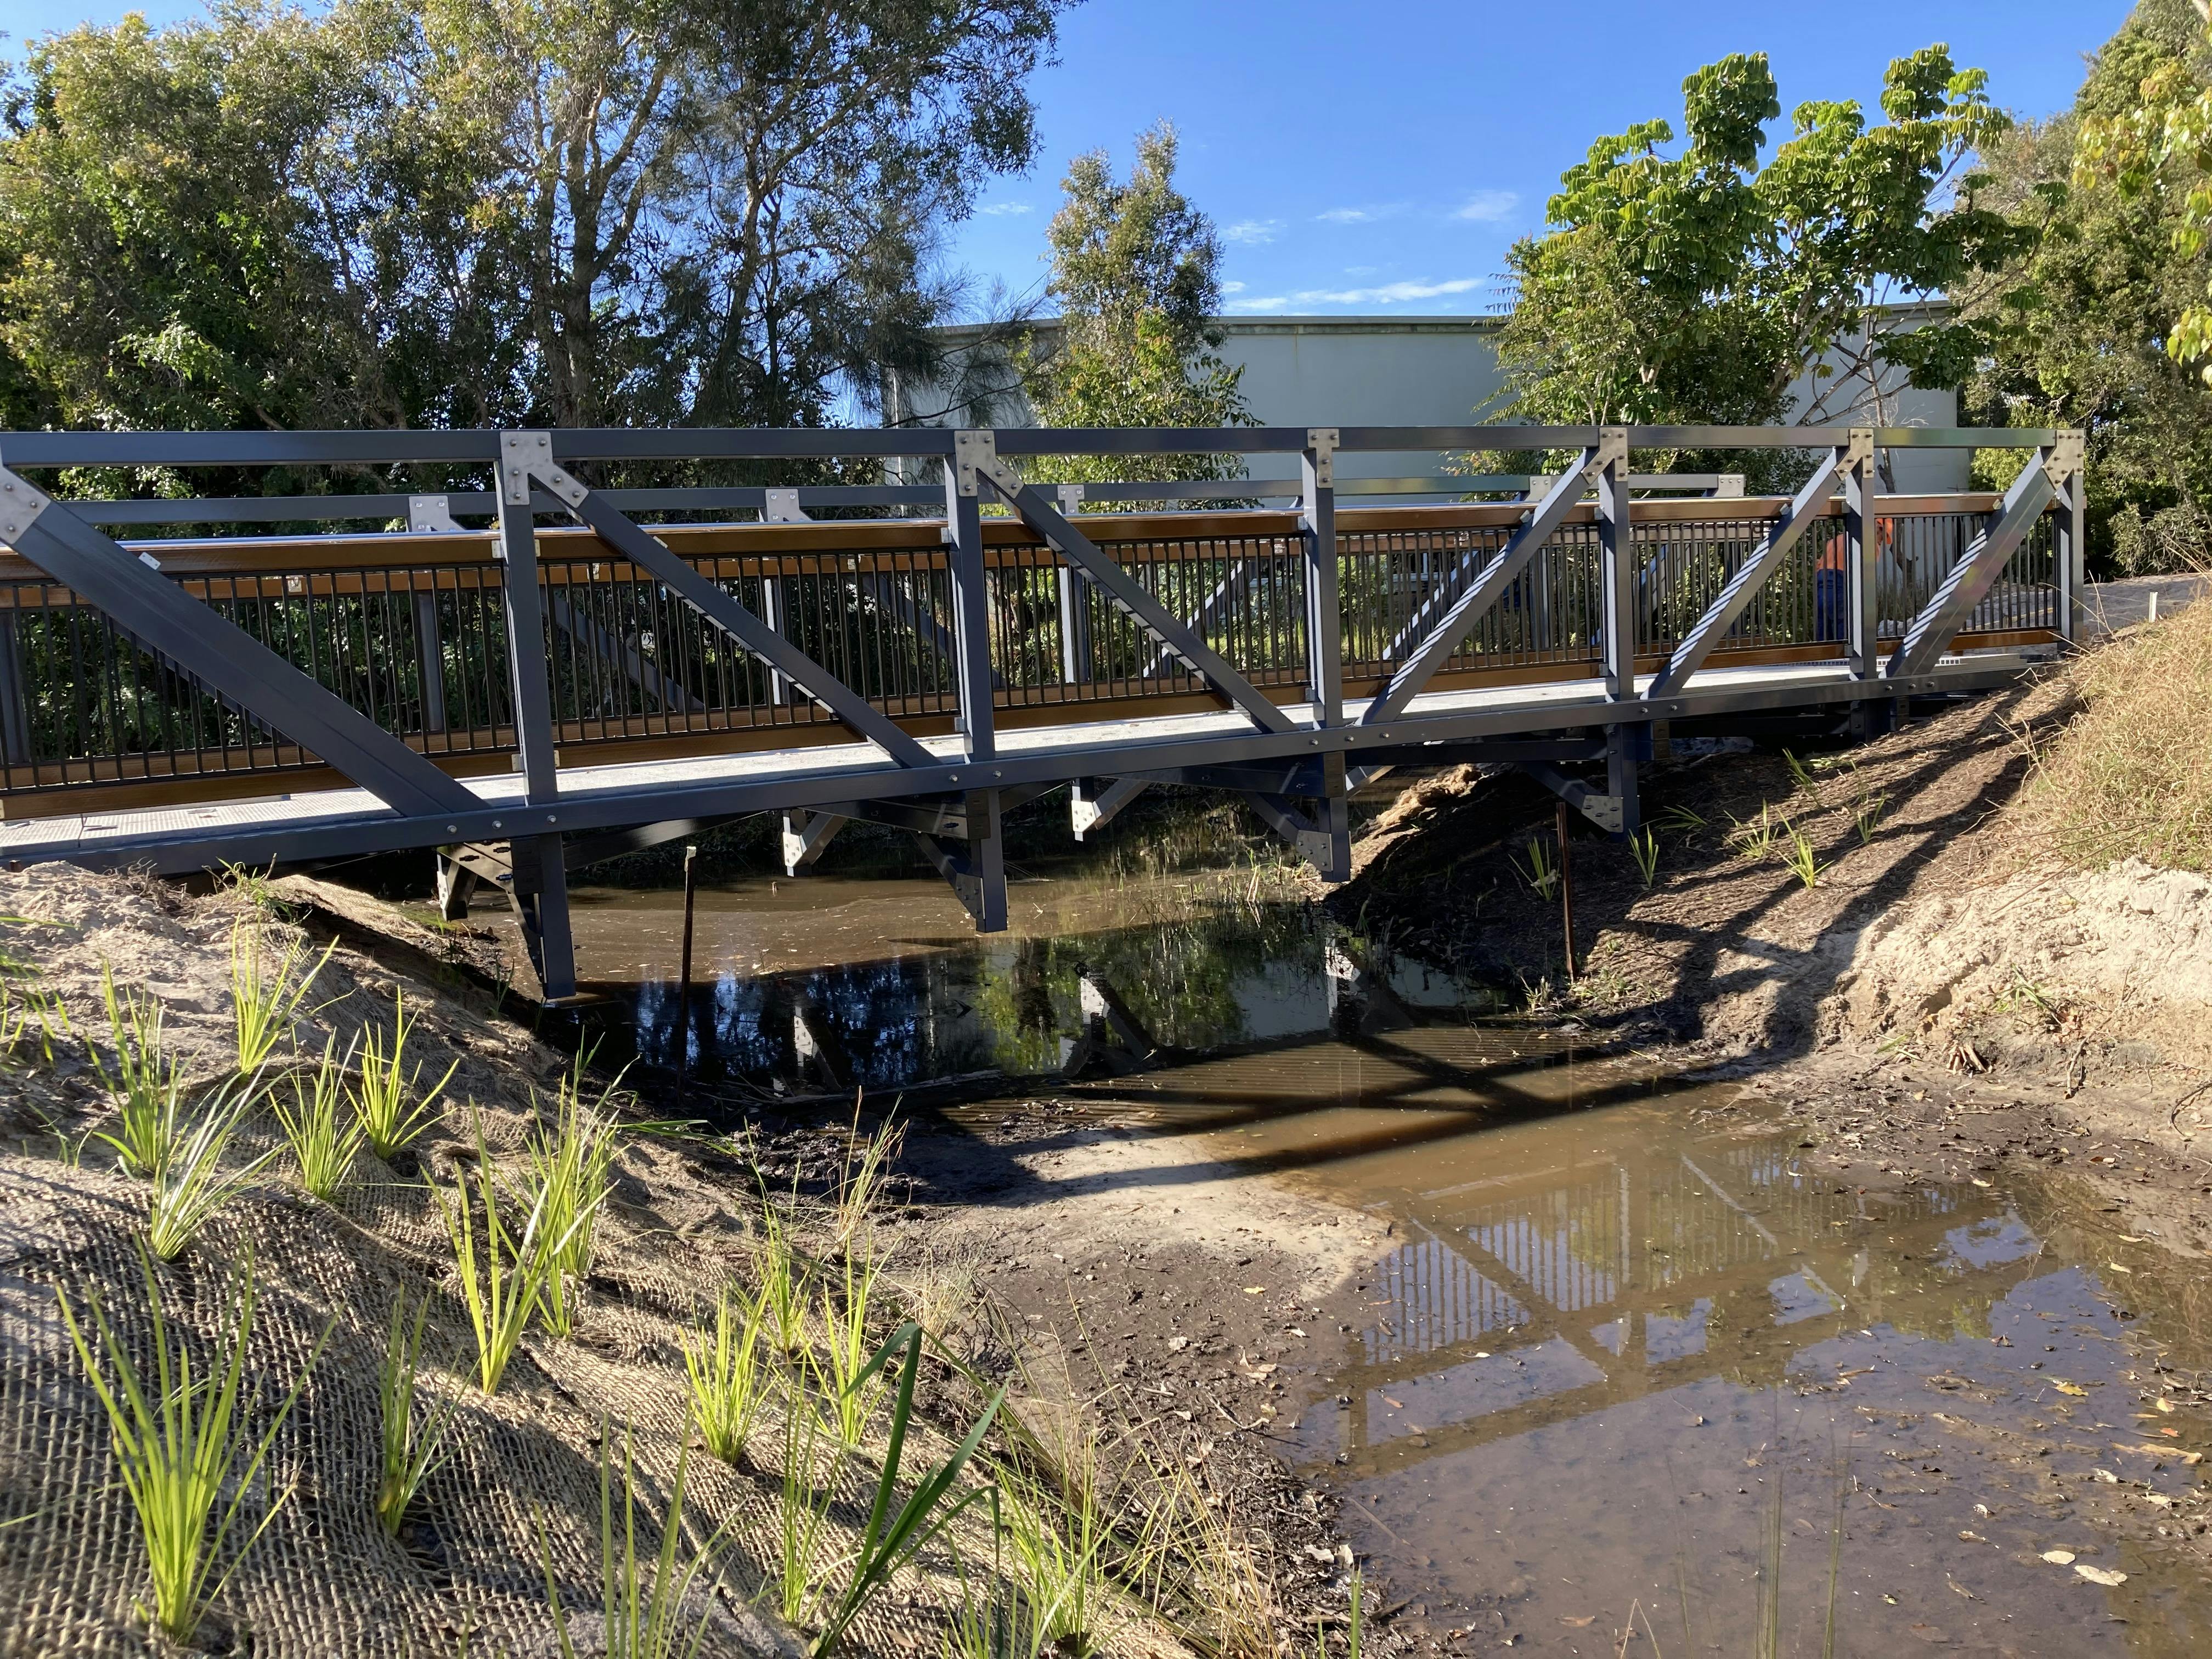 Additional Flow Path upgrades, photo by Planit Consulting